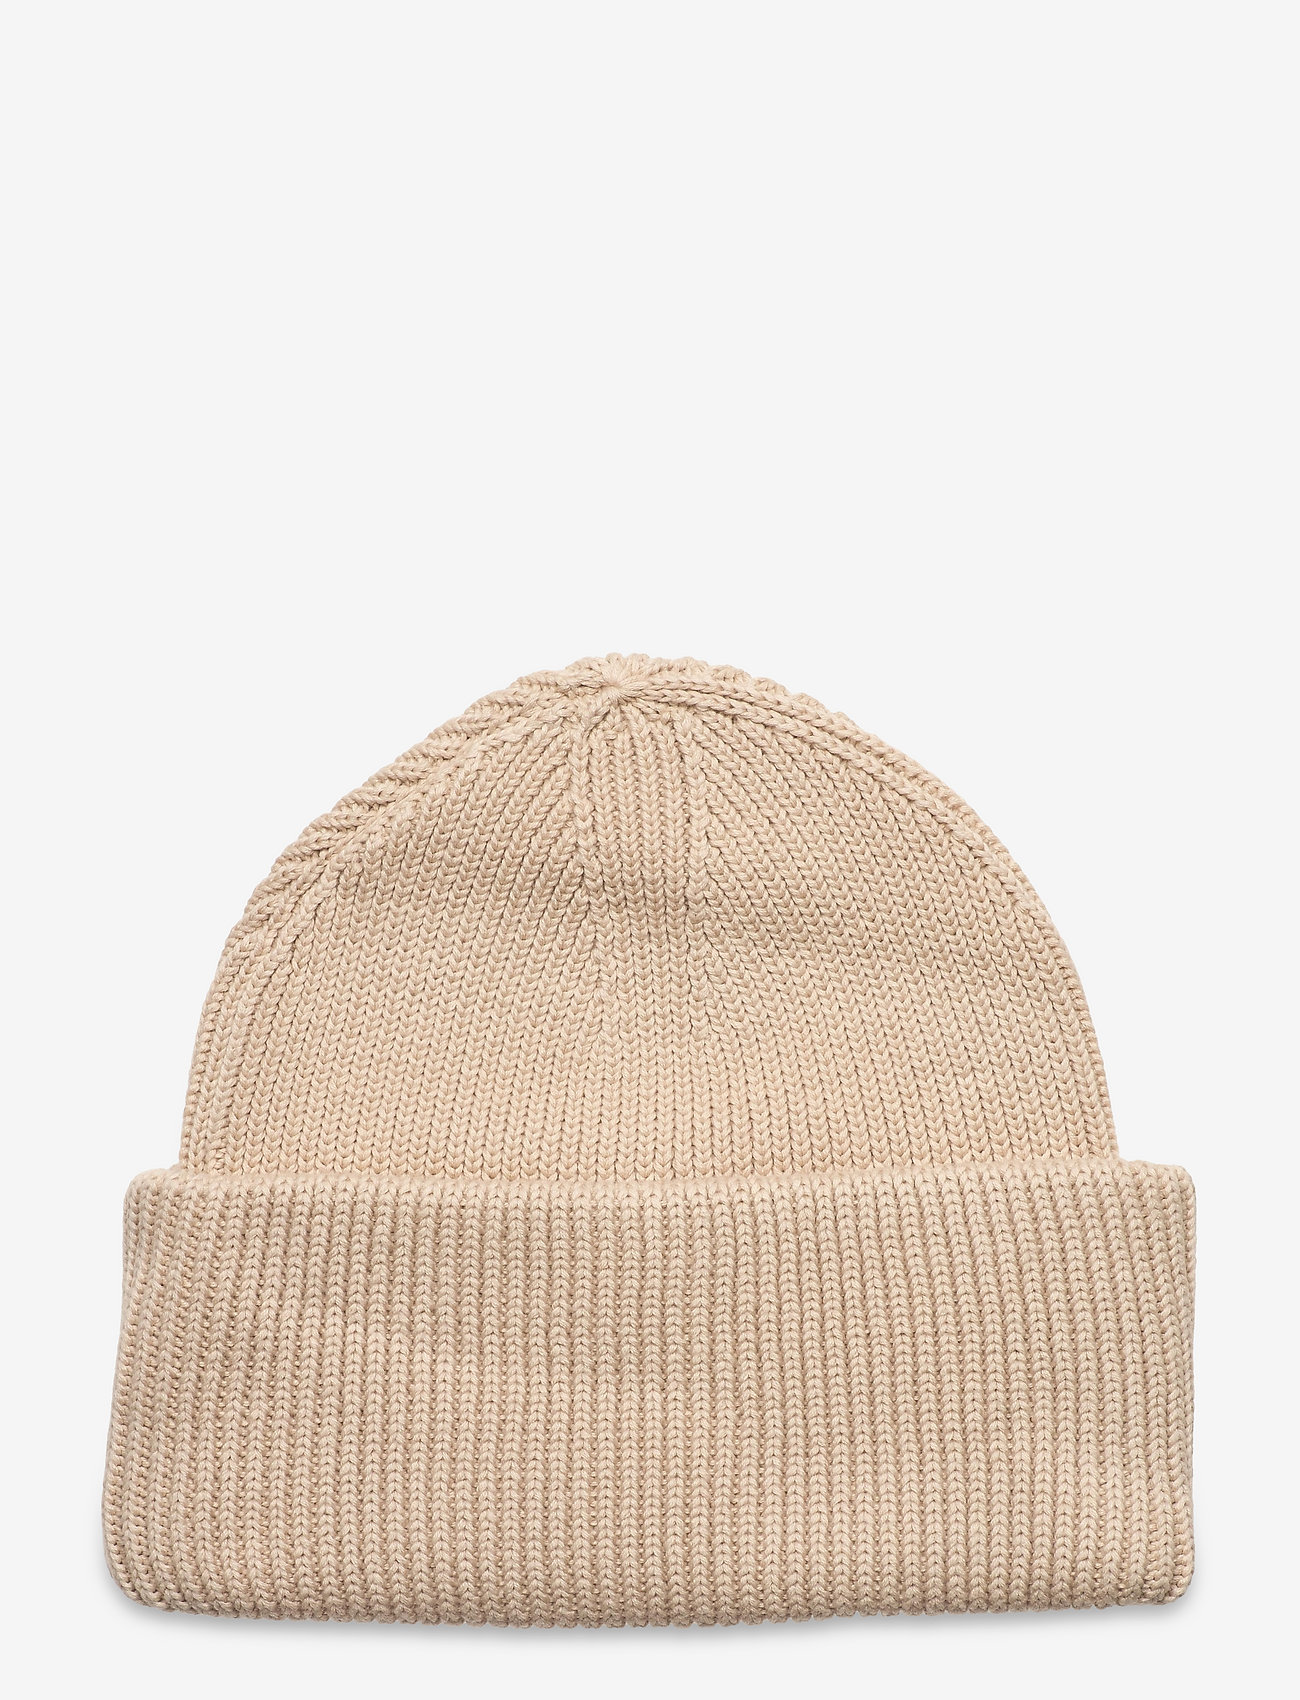 Revolution - Big fold up beanie - lowest prices - offwhite - 1